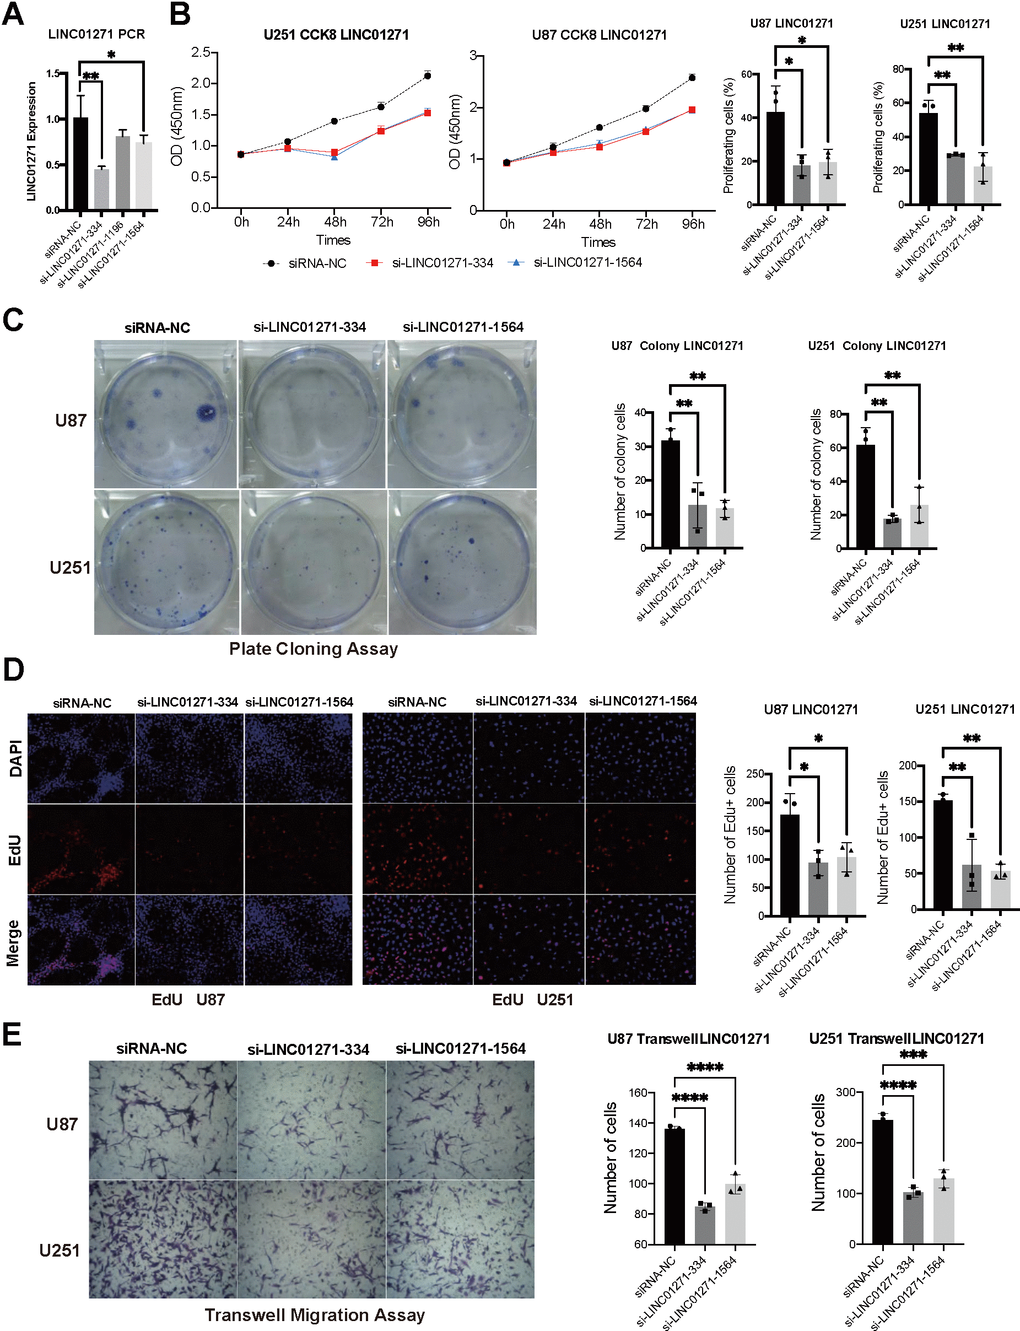 Validation of LINC01271 in positively regulating glioma cell proliferation and migration in vitro. (A) LINC01271 expression after silencing. (B–D) CCK-8, plate clone assay, EdU verified the proliferation of glioma cells after LINC01271 silencing. (E) Glioma cell migration after LINC01271 silencing.